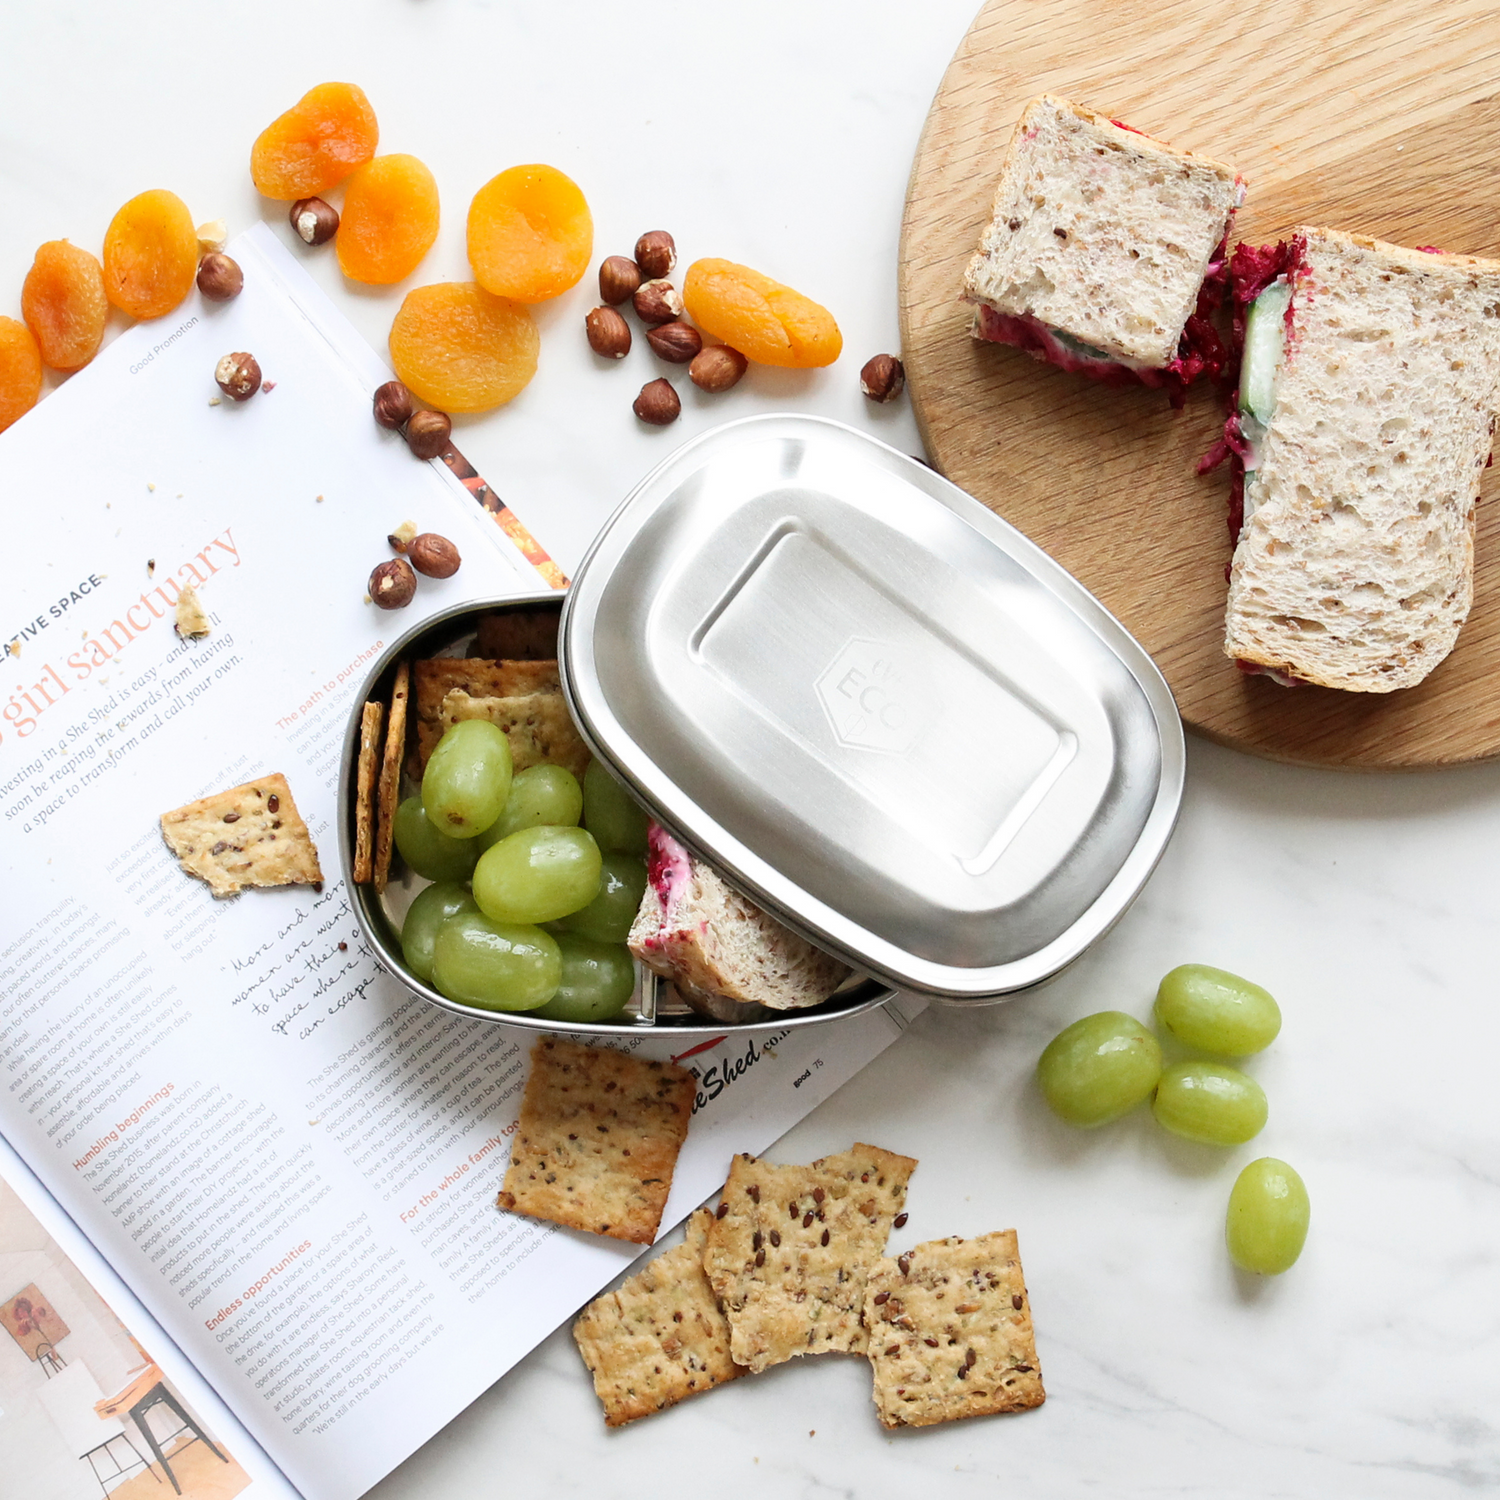 Ever Eco Stainless Steel Bento Snack Box 2 Compartments-The Living Co.